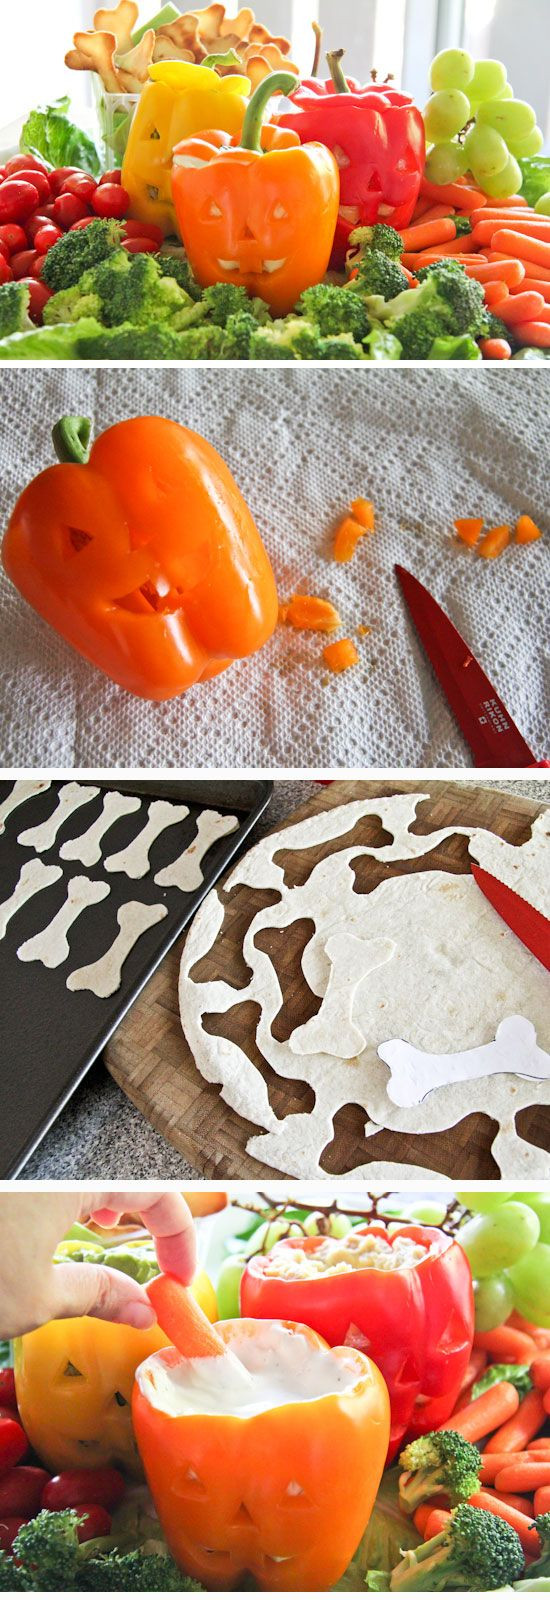 Halloween Party Snack Ideas For Kids
 17 Best images about Happy Healthy Halloween on